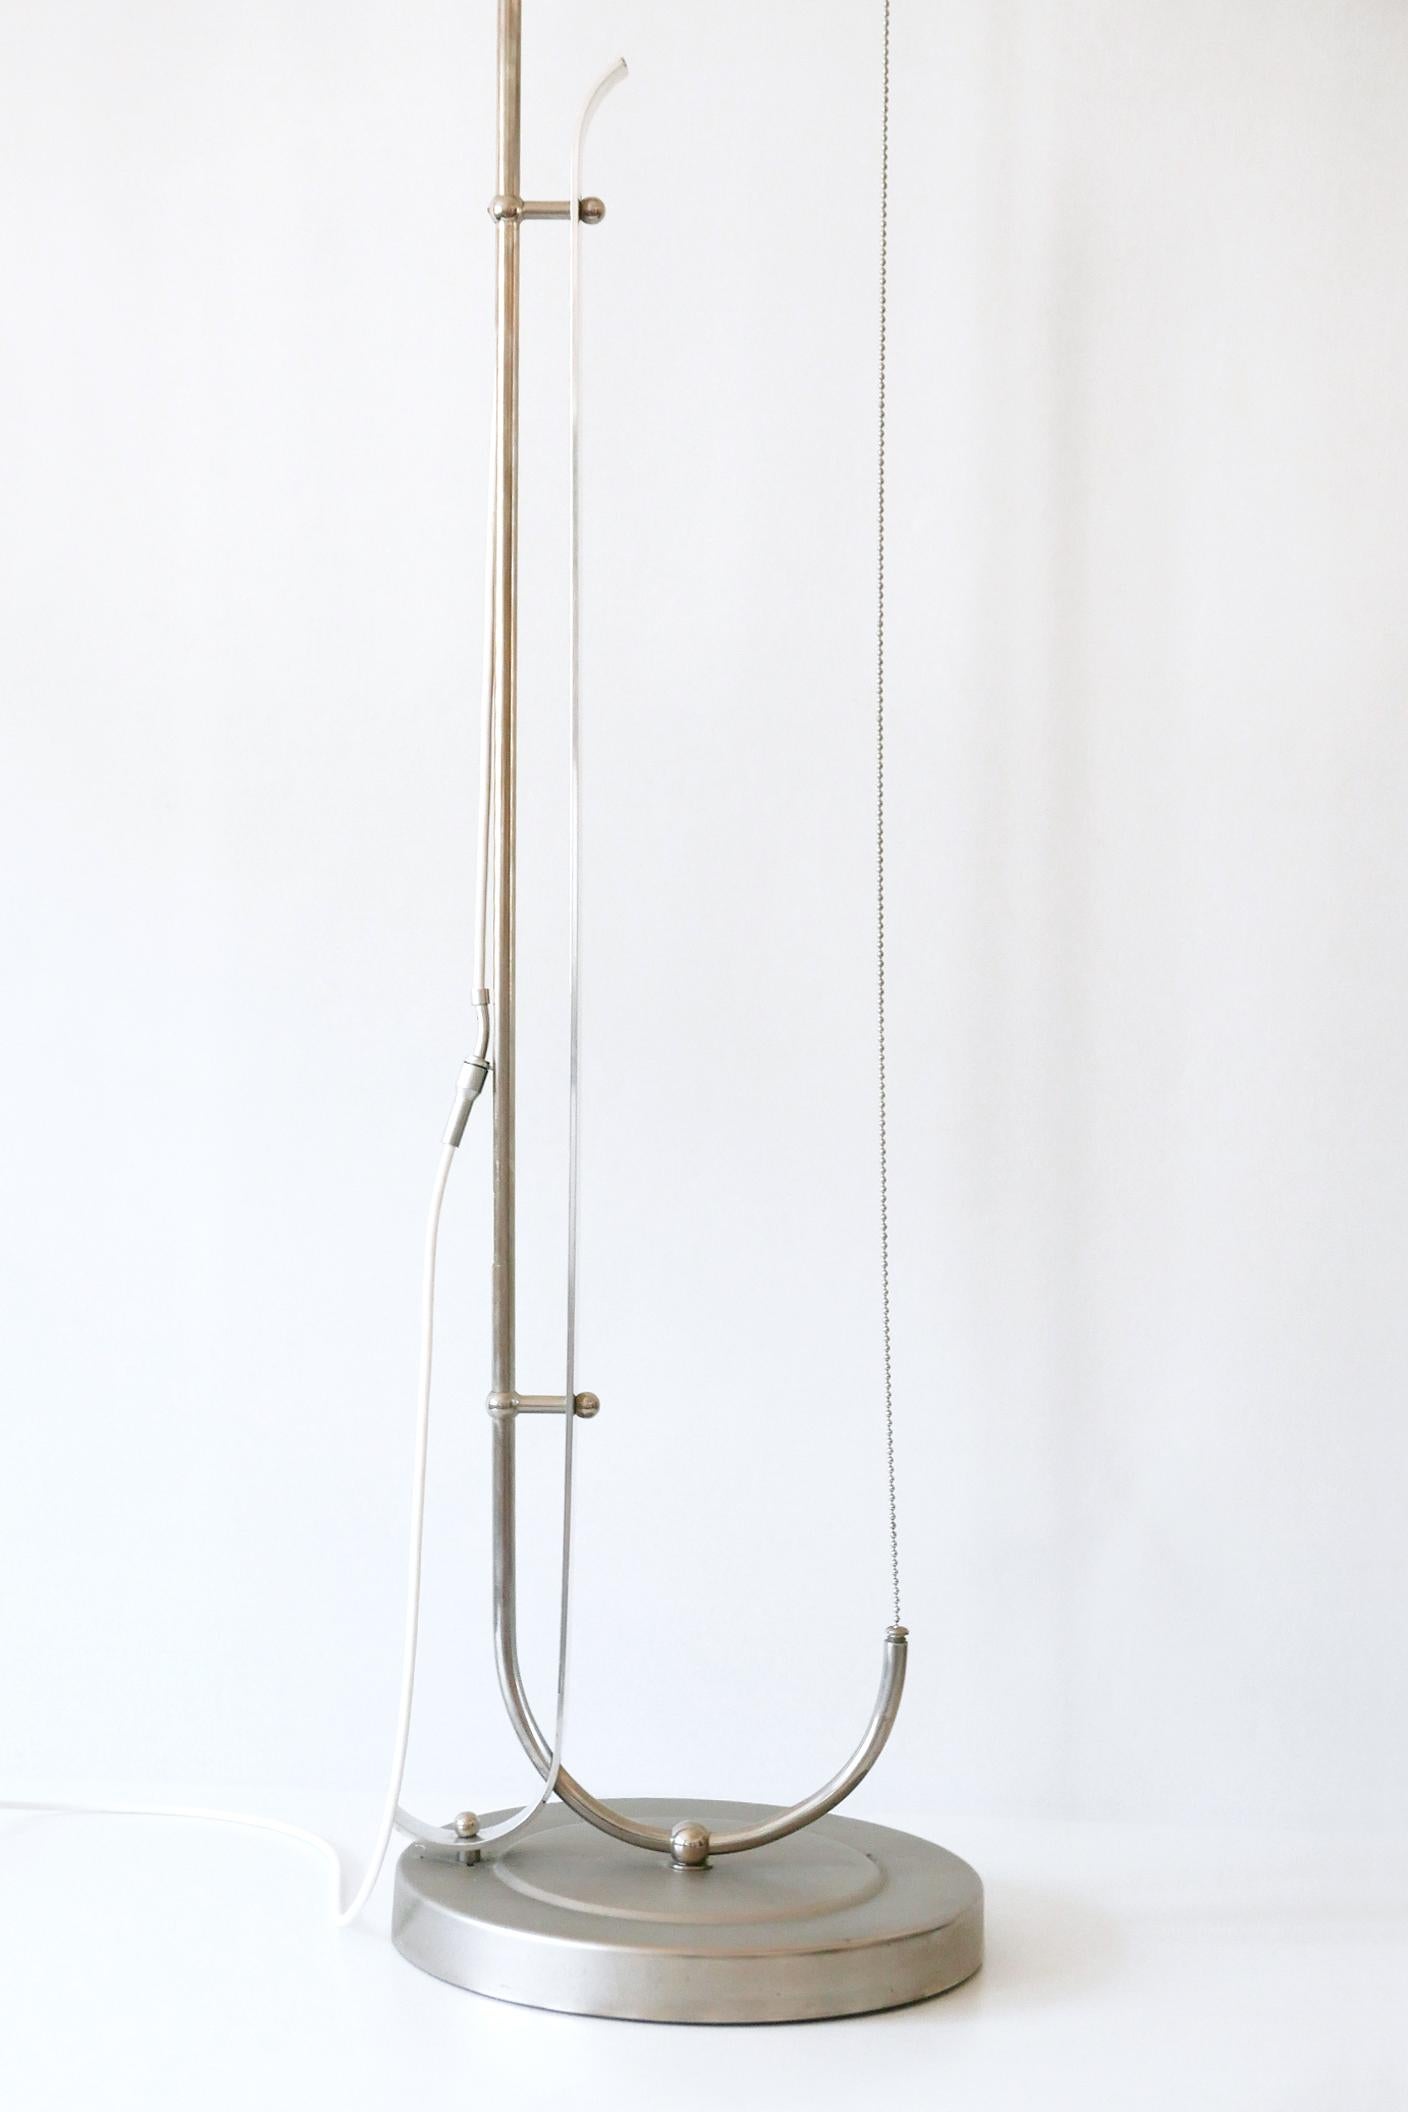 Bauhaus Floor Lamp by Karl Trabert for Schanzenbach & Co 1930s Germany For Sale 10